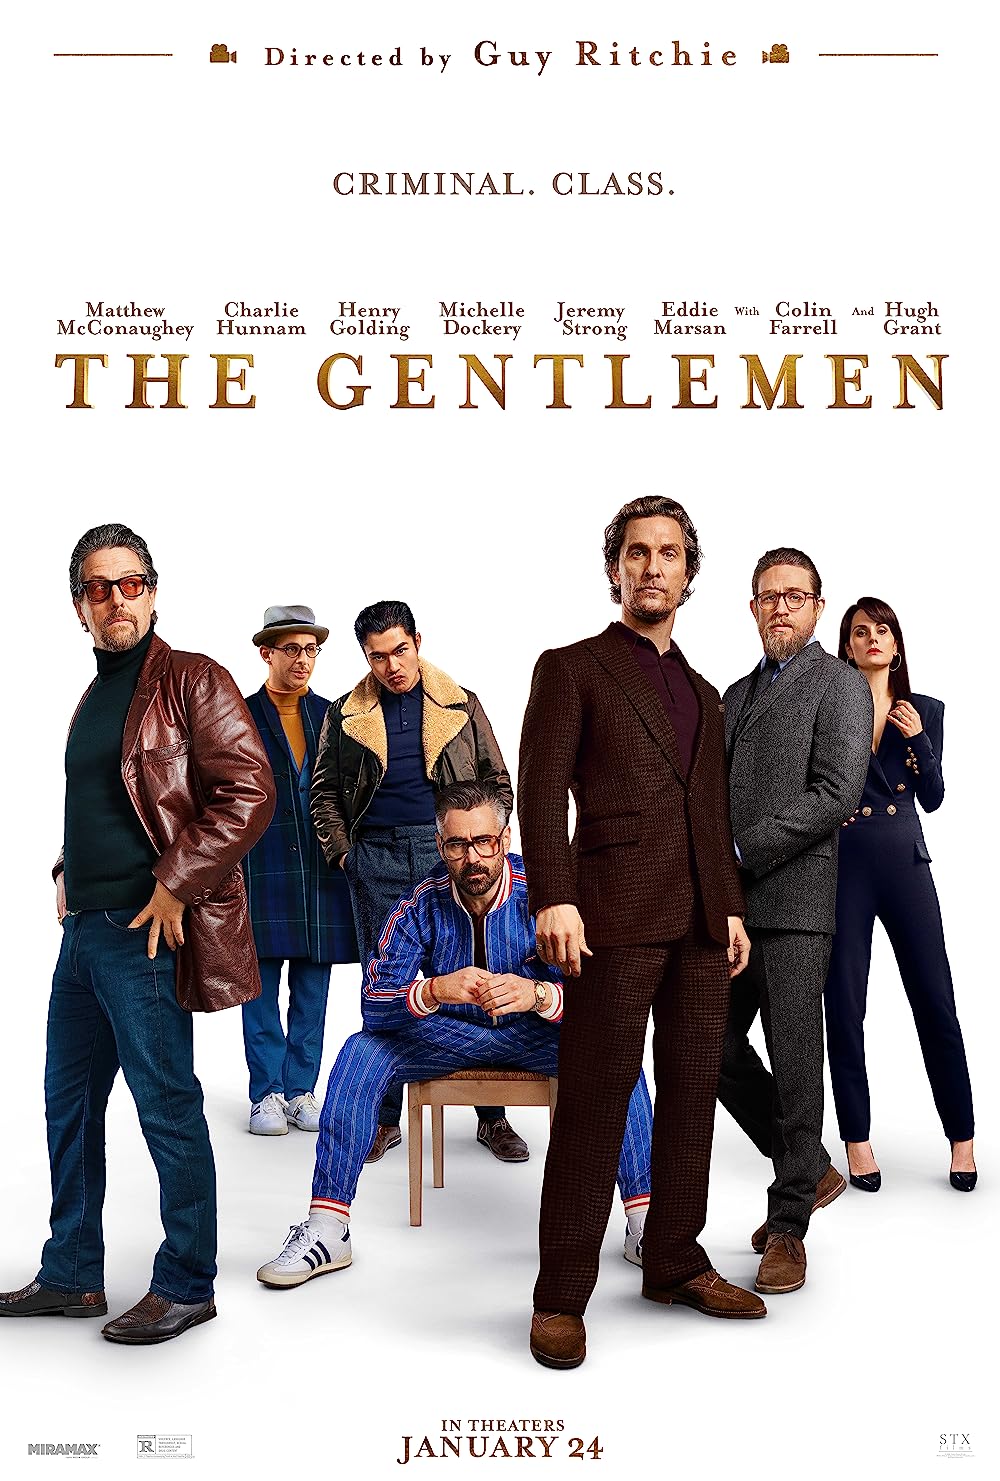 The Gentlemen - March 7 - Streaming on NetflixDirected by Guy Ritchie, 